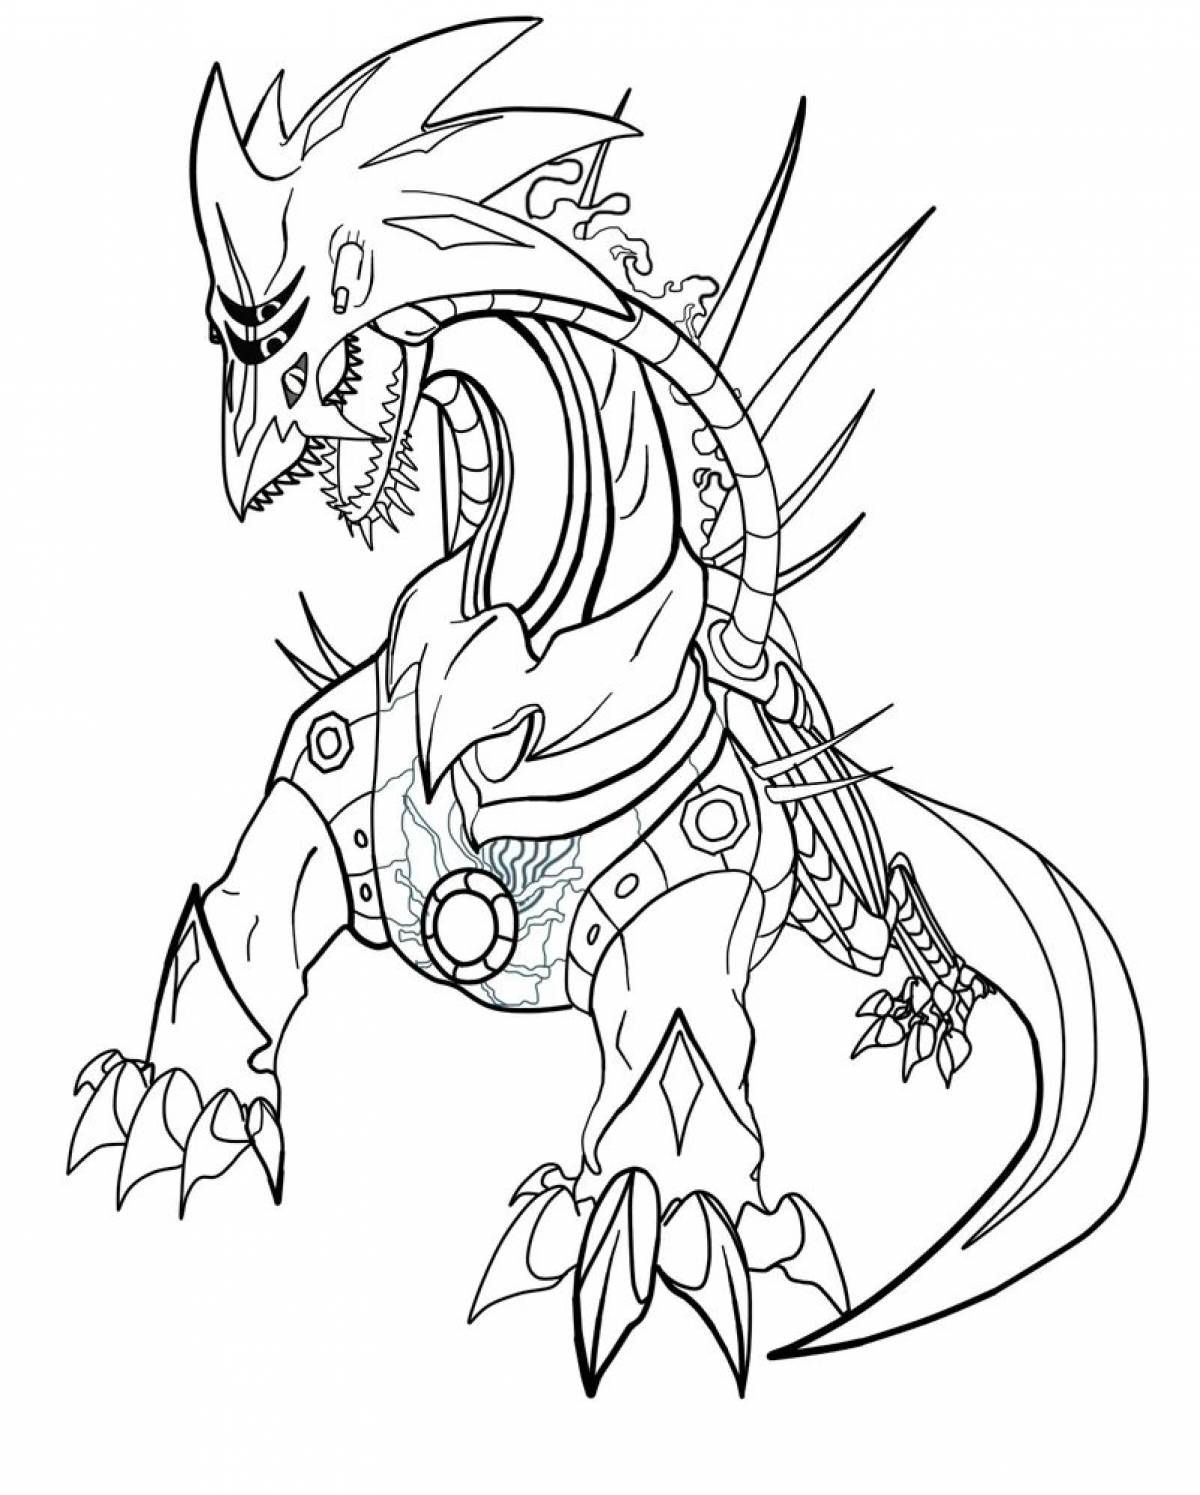 Deluxe robot dragon coloring page